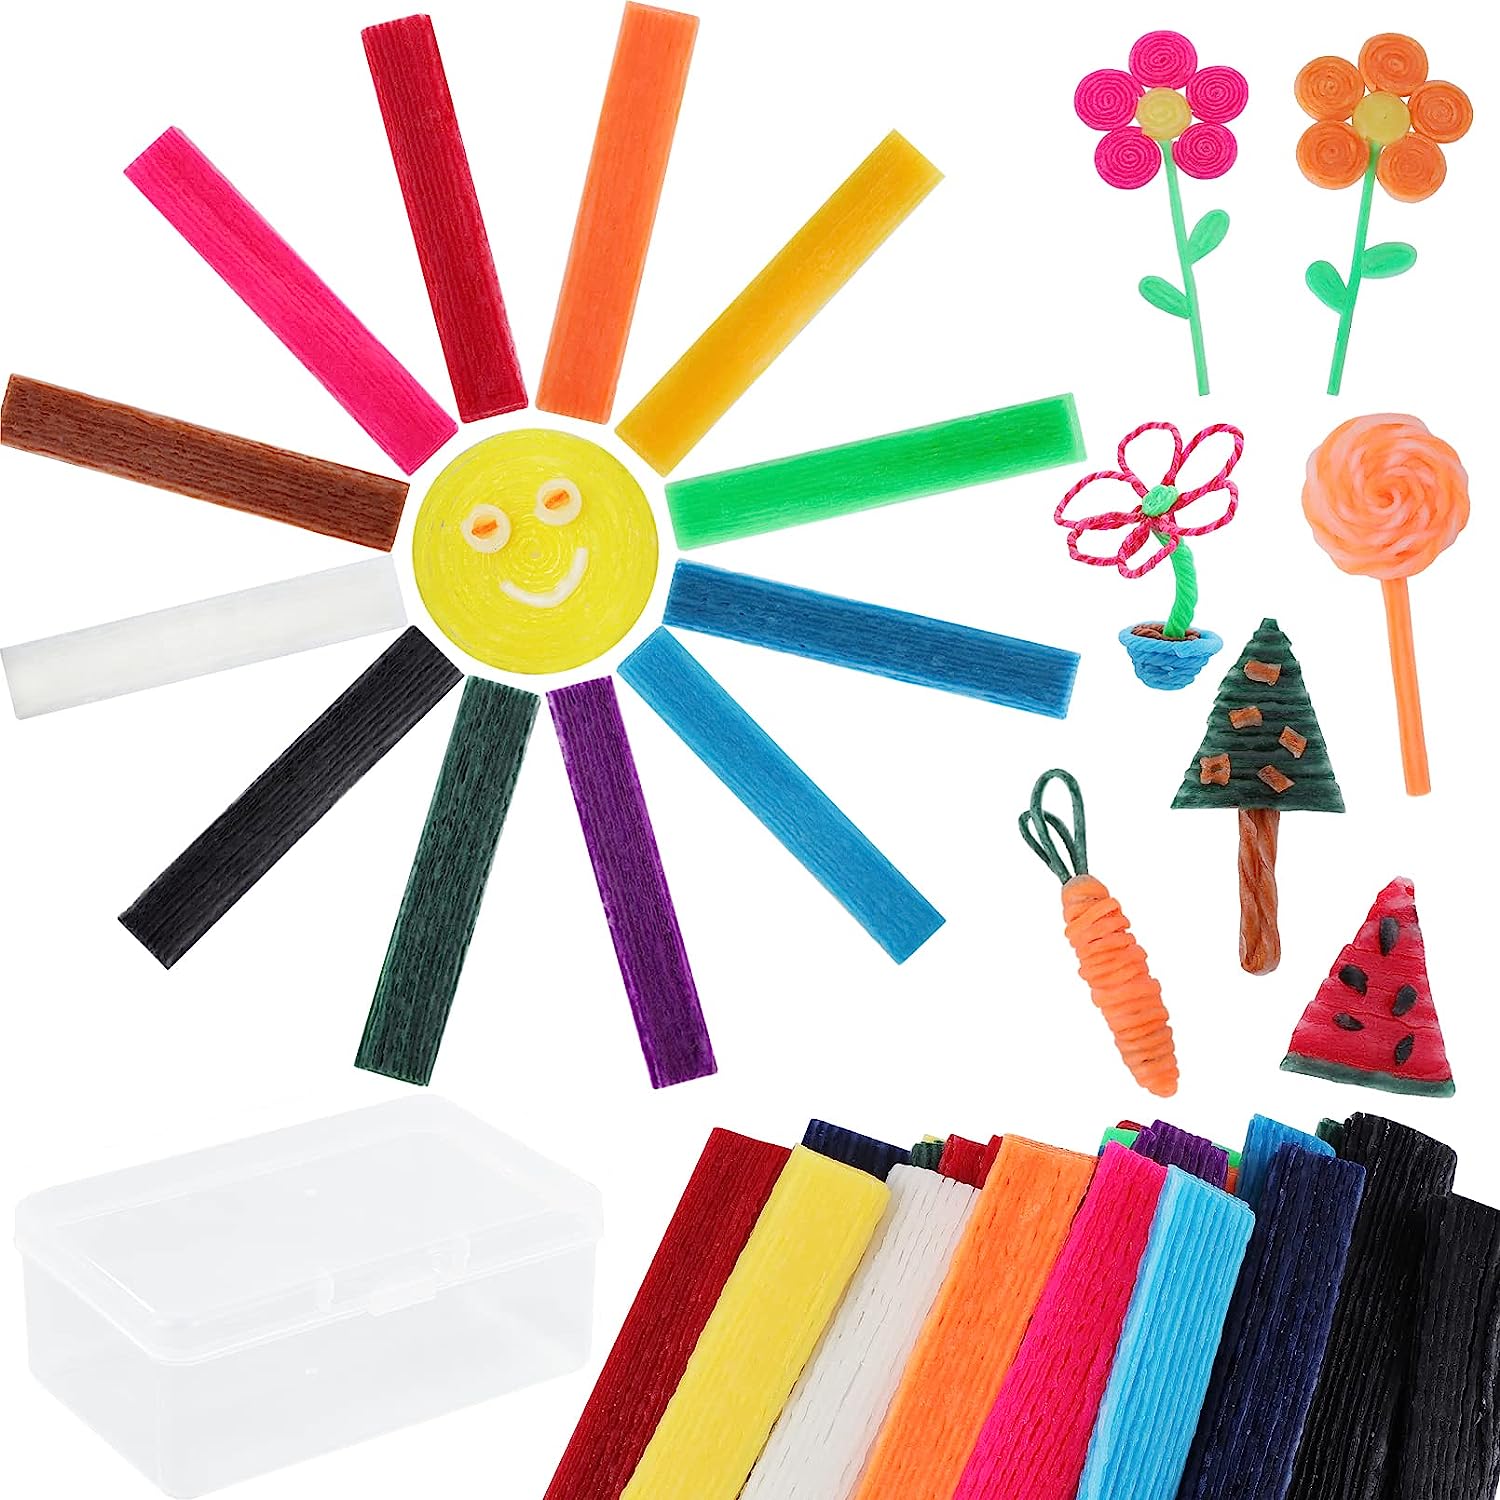 Wikki Stix Bilingual Traveler (French and English) - 144 Wikki Stix in  bright, colorful carrying travel case and 12 page activity book, Made in  the